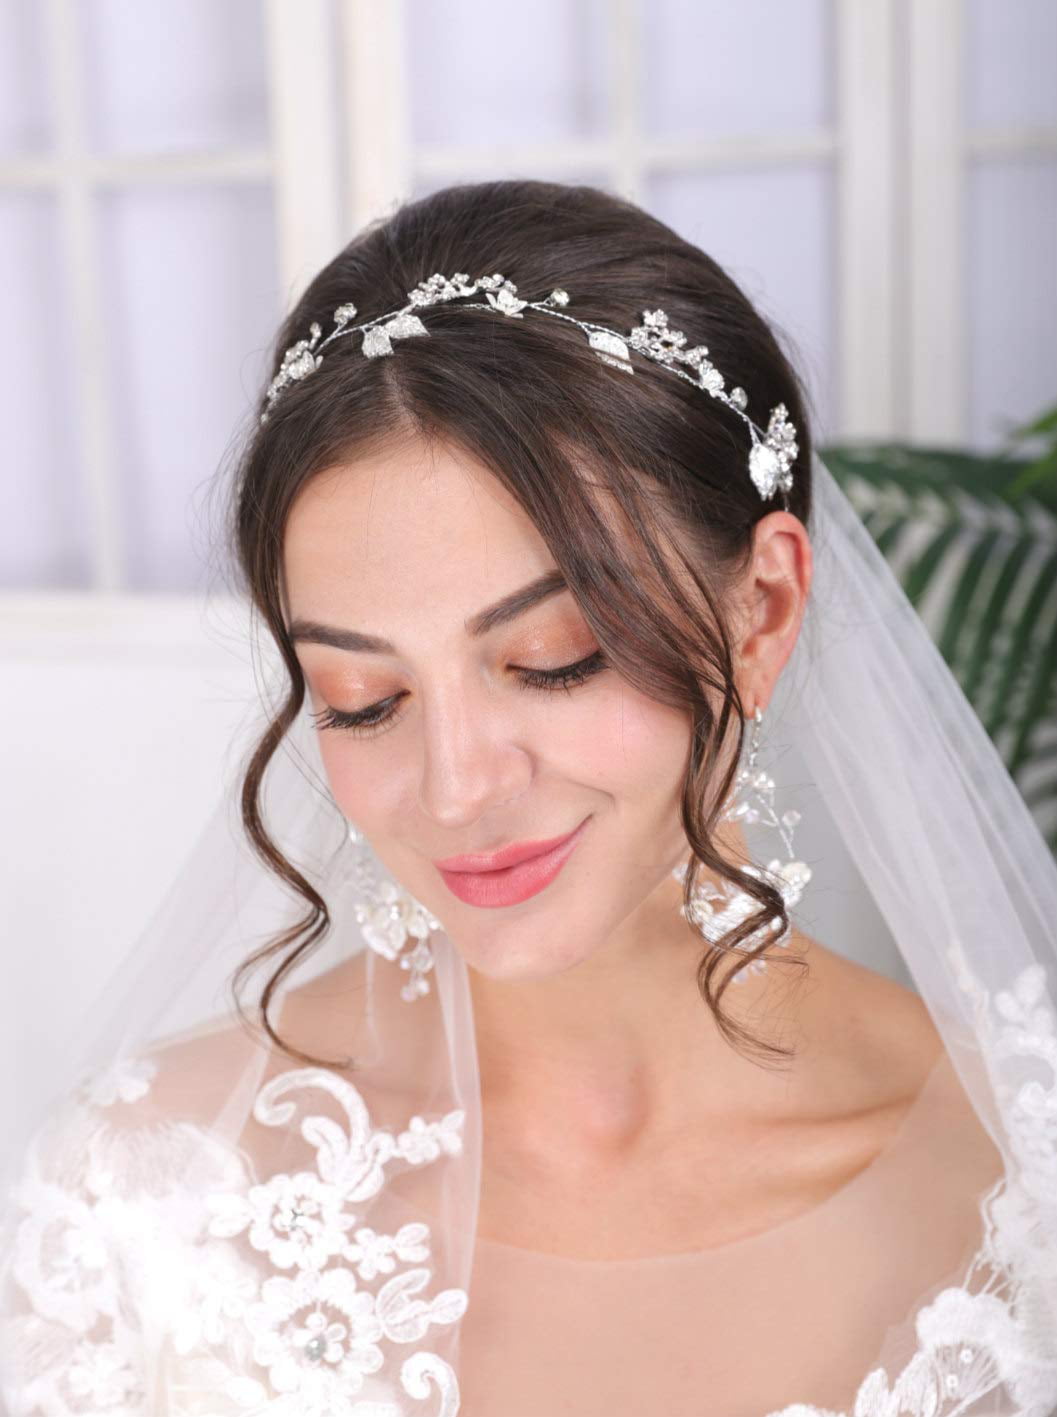 Elegant Crystal Pearl Hair Head Band Accessories Bridal Party Pageant Prom 